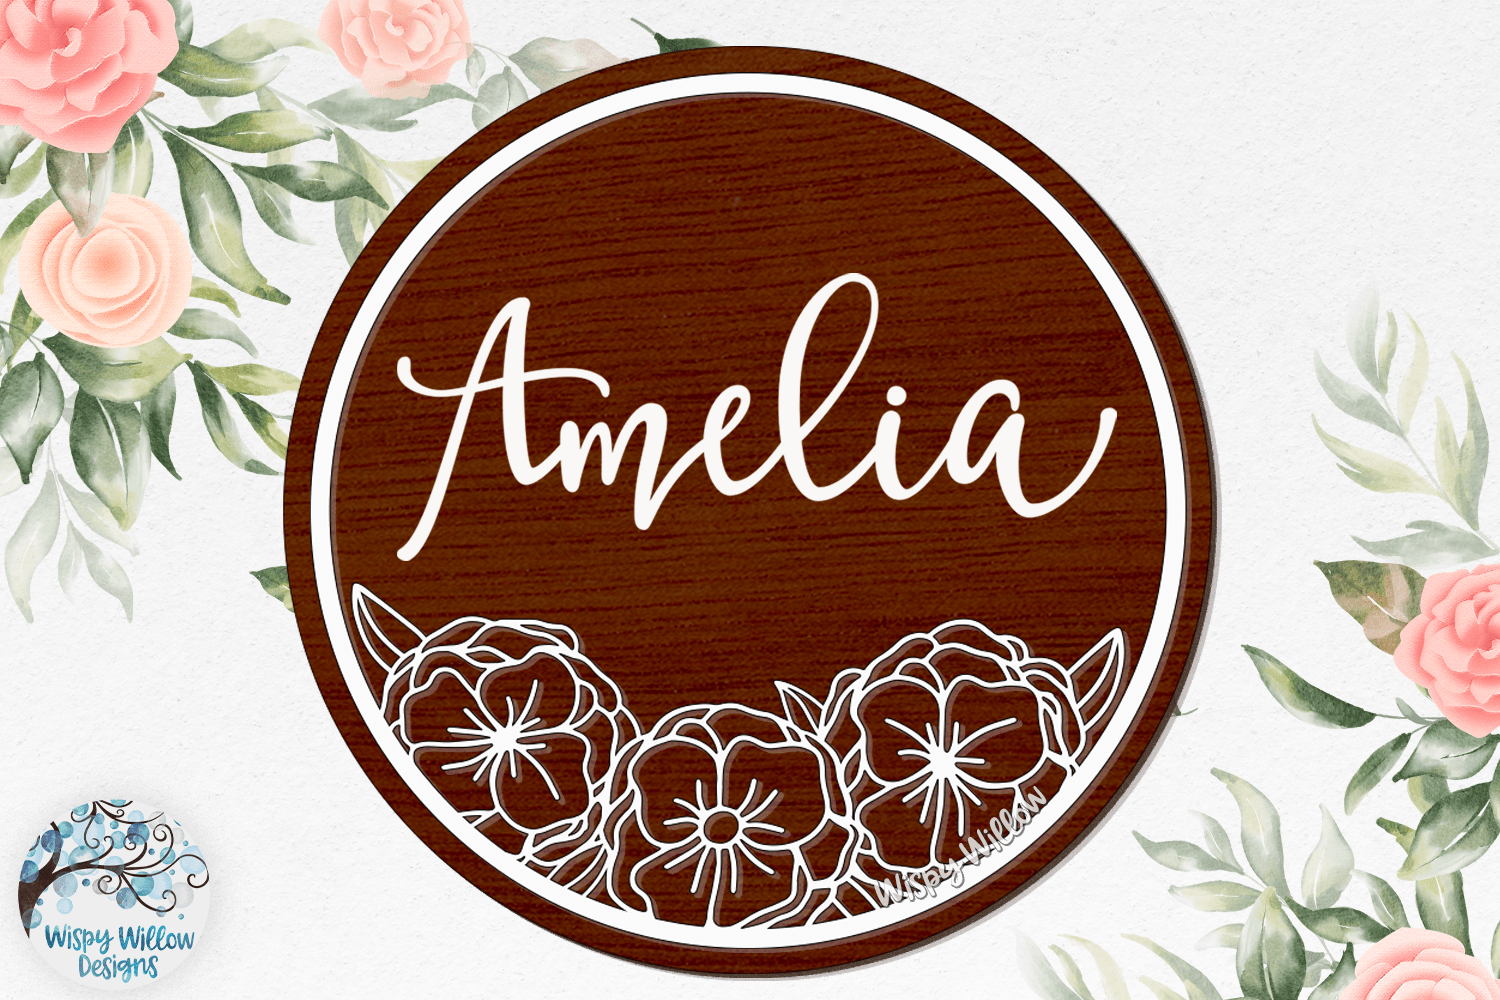 Floral Circle Sign for Glowforge or Laser Cutter Wispy Willow Designs Company